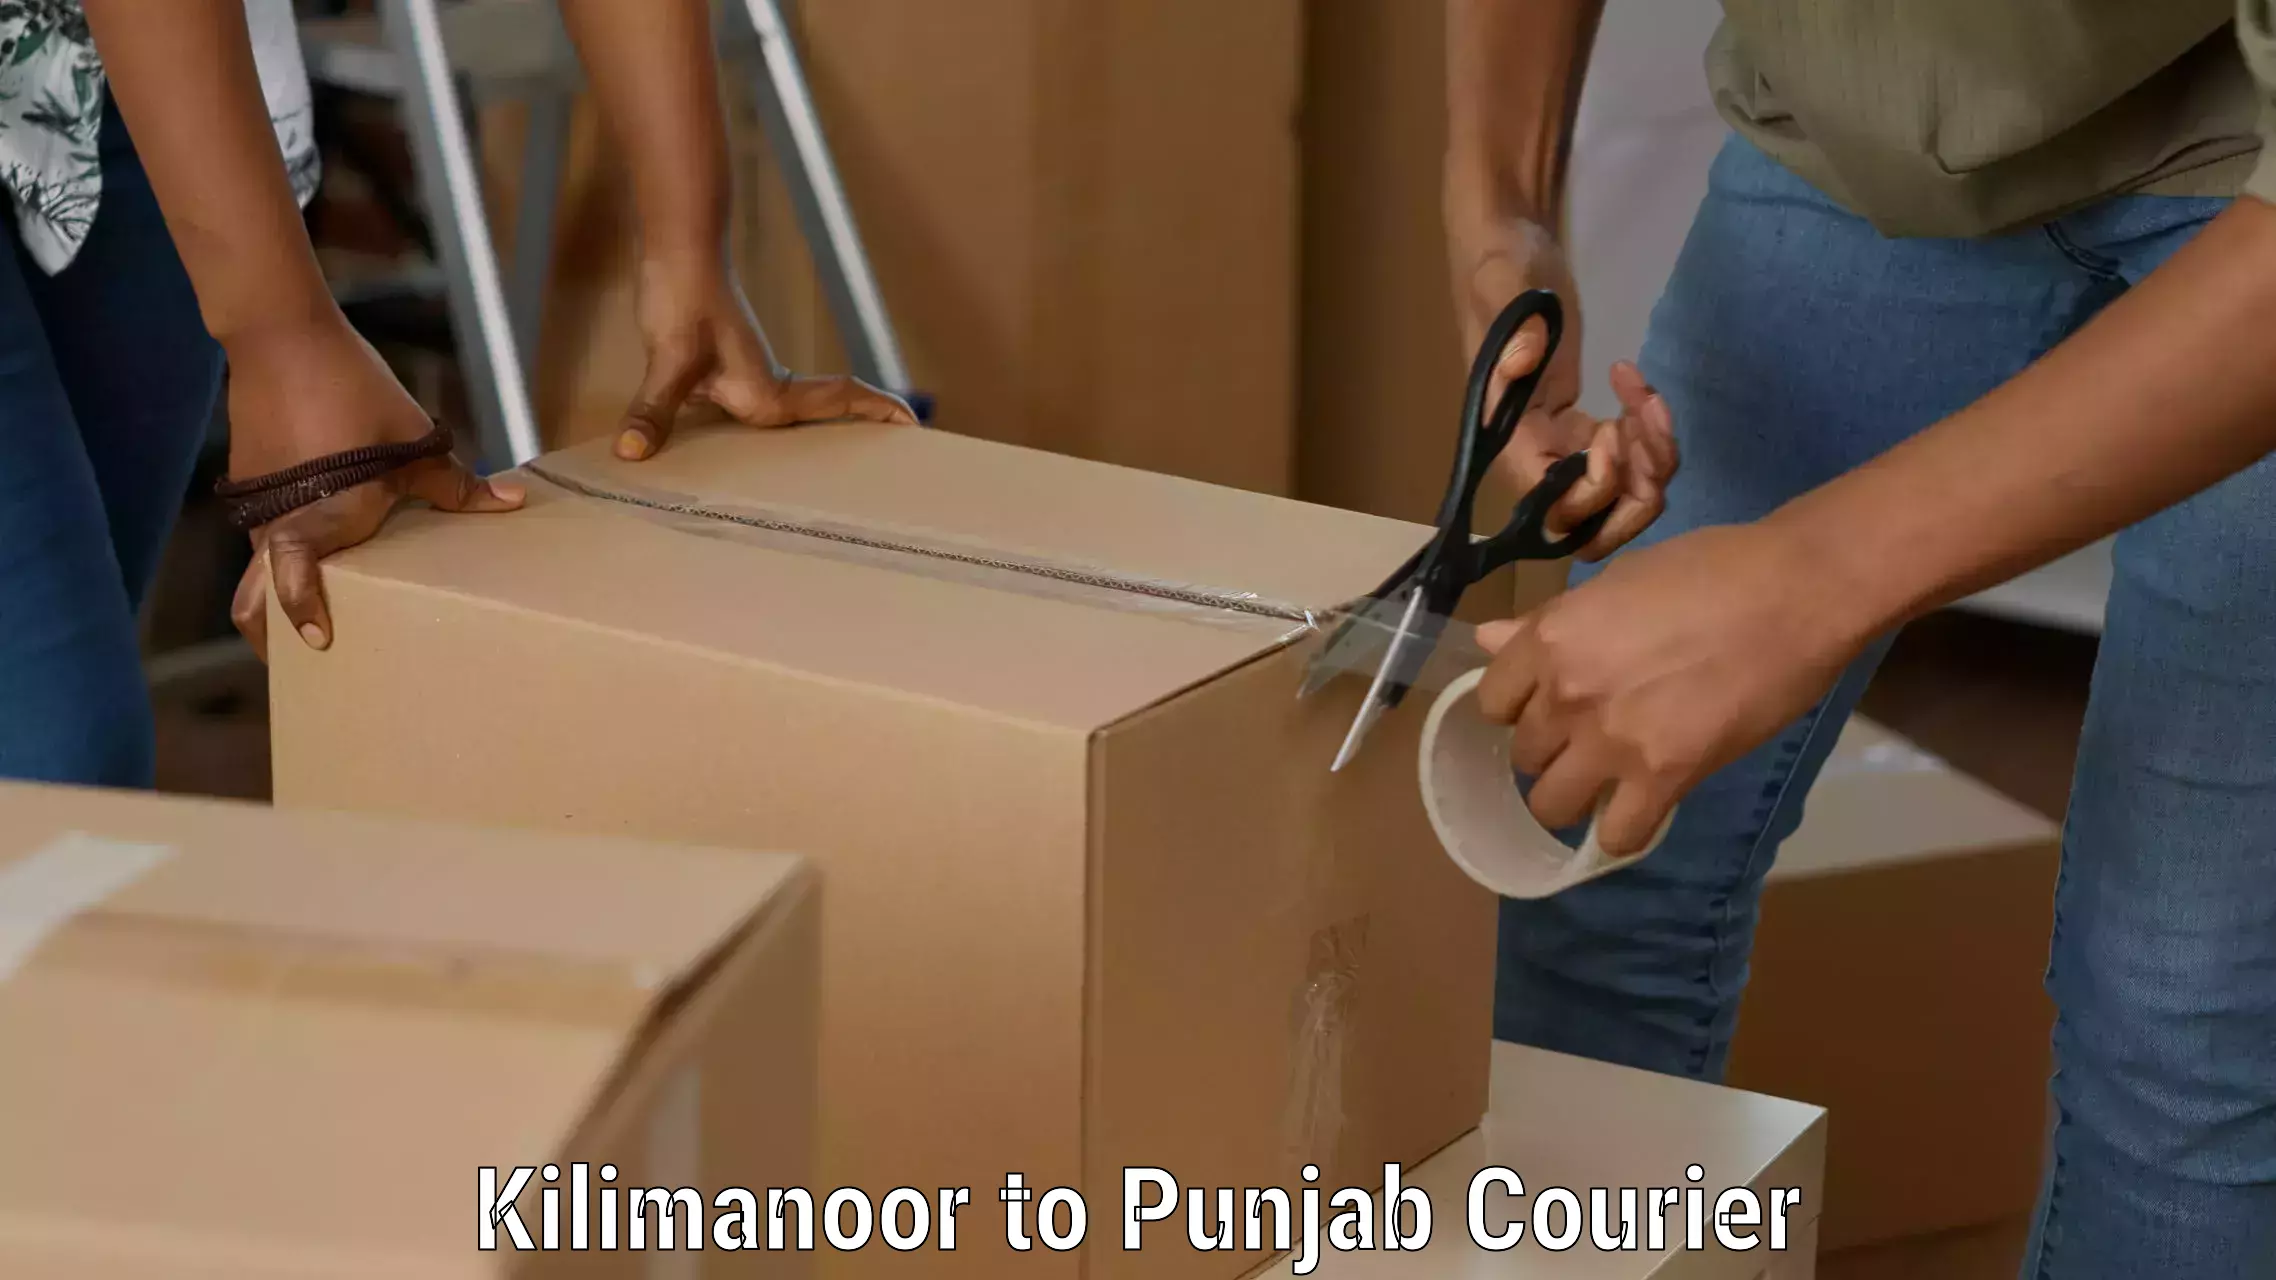 Courier service efficiency in Kilimanoor to Punjab